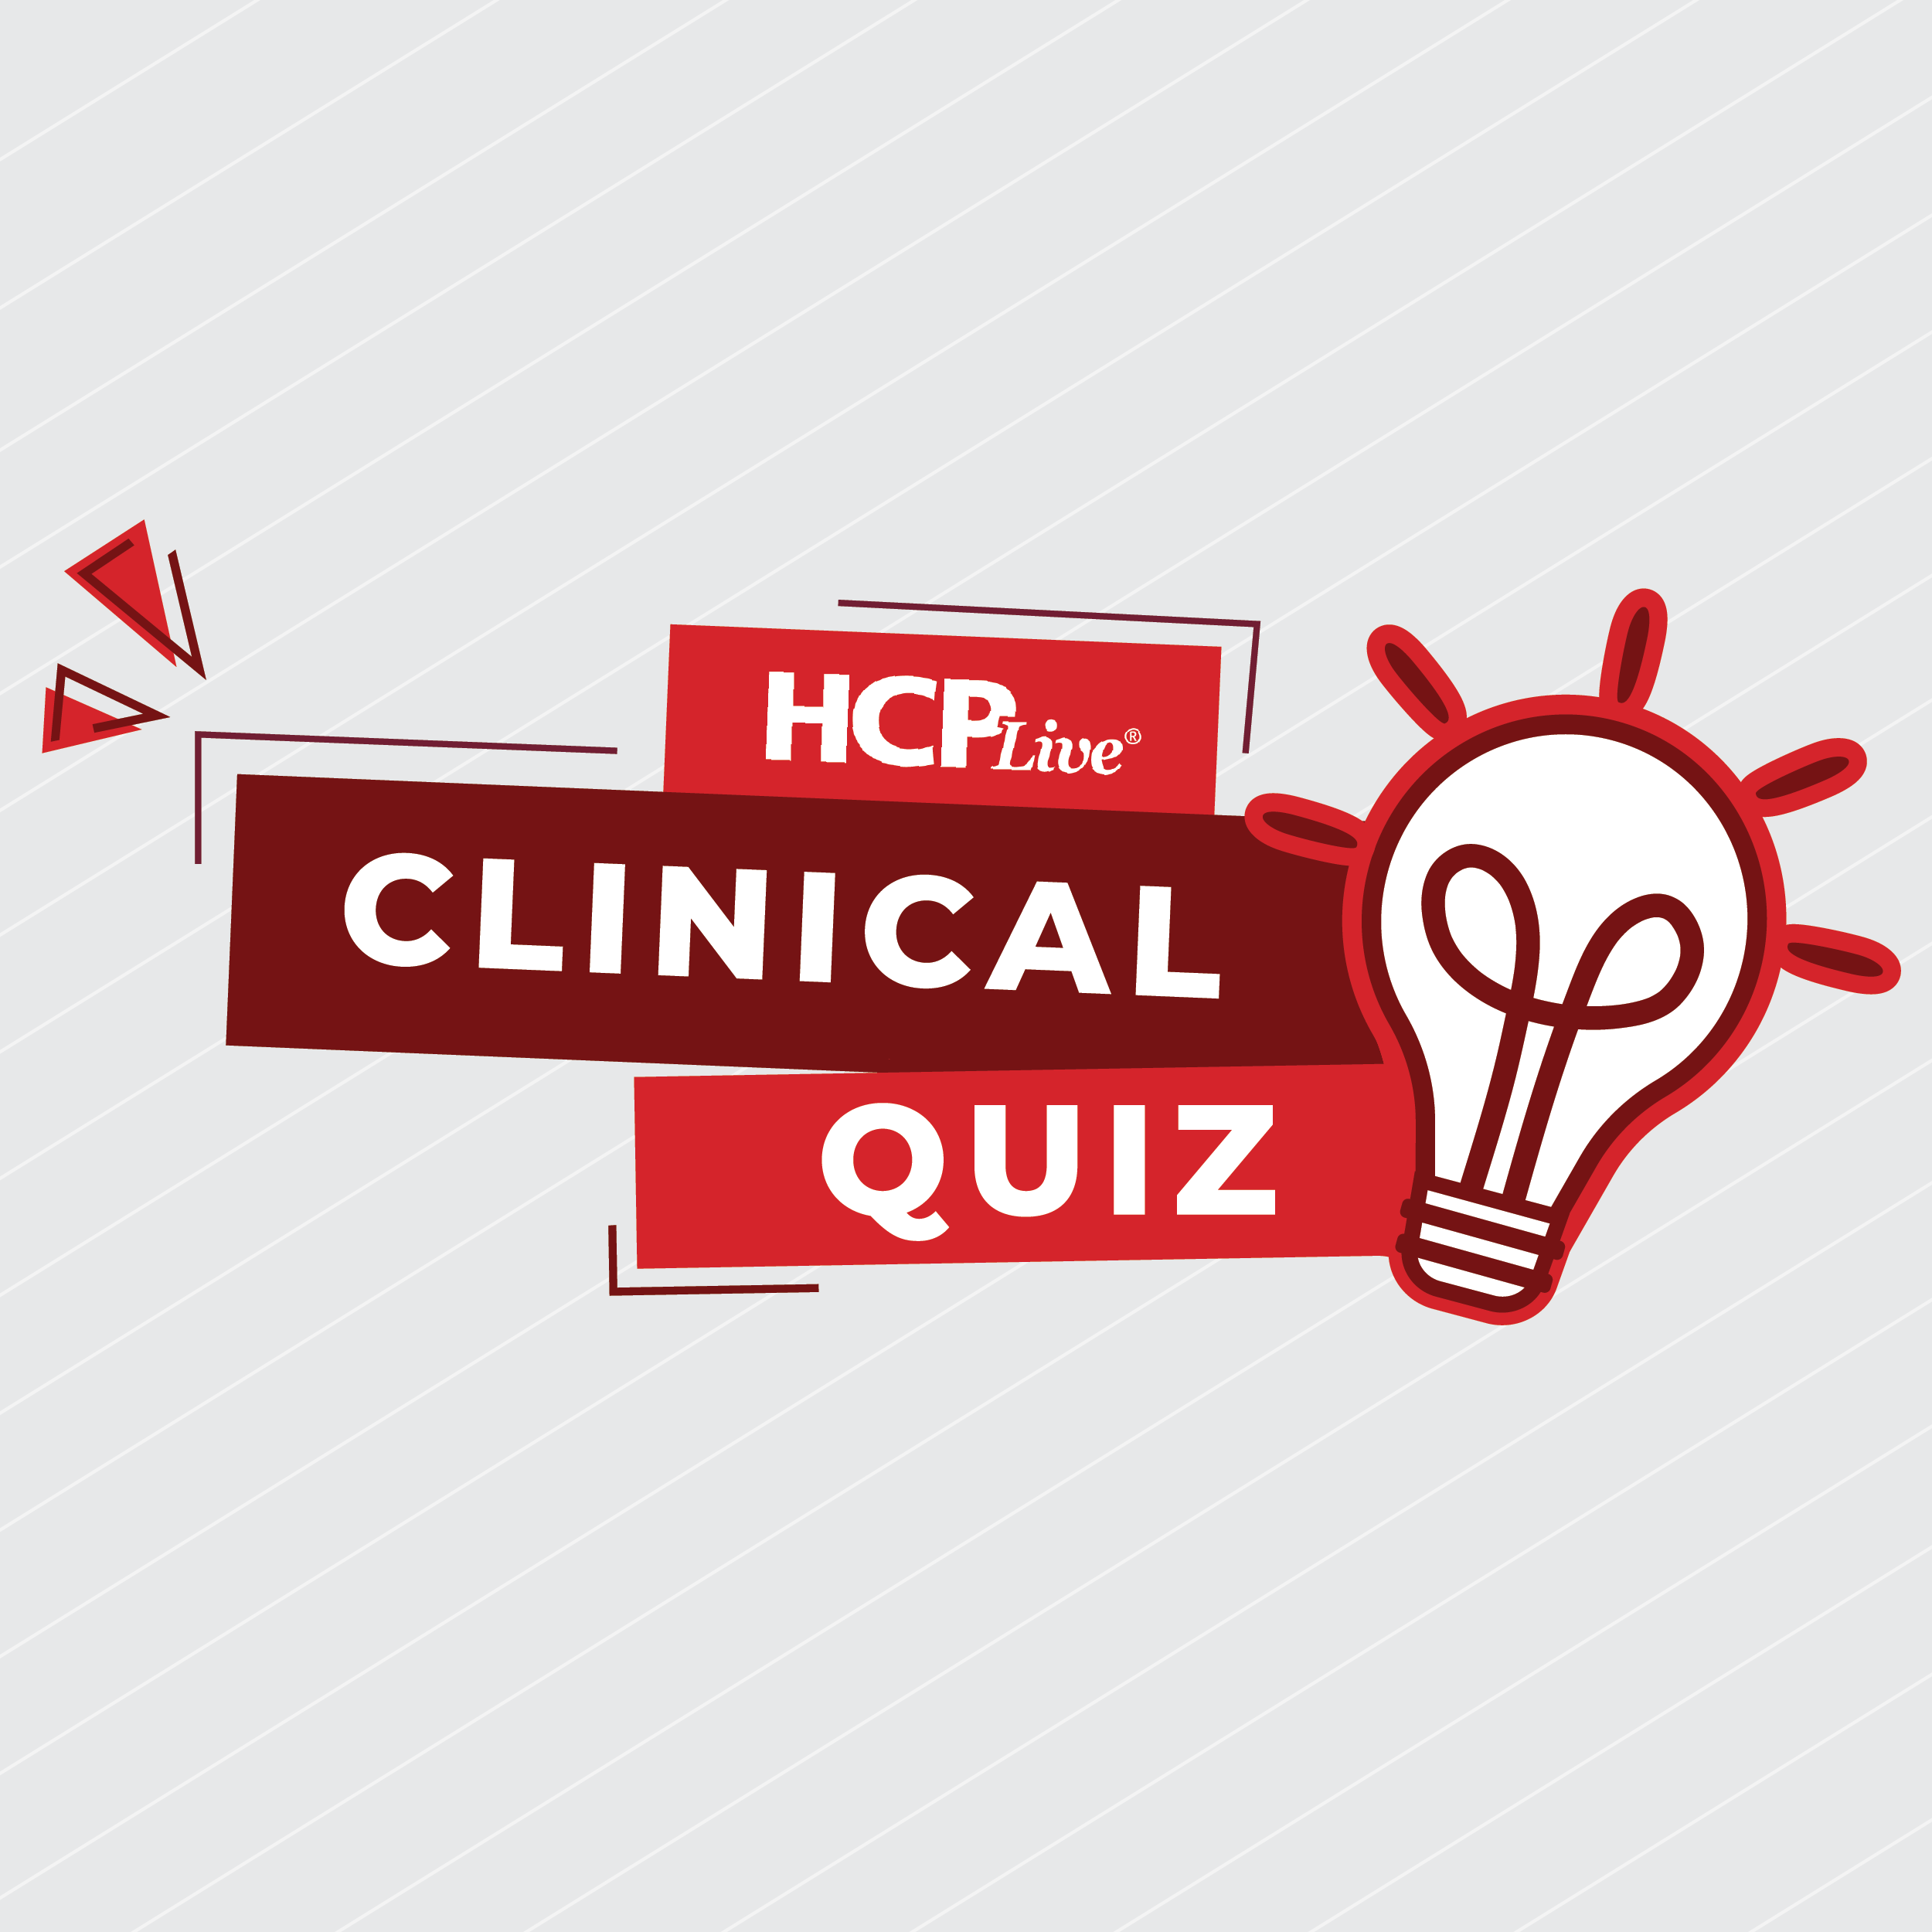 Clinical Quiz: Protein and Energy Intake in Chronic Kidney Disease from KDOQI Guidelines